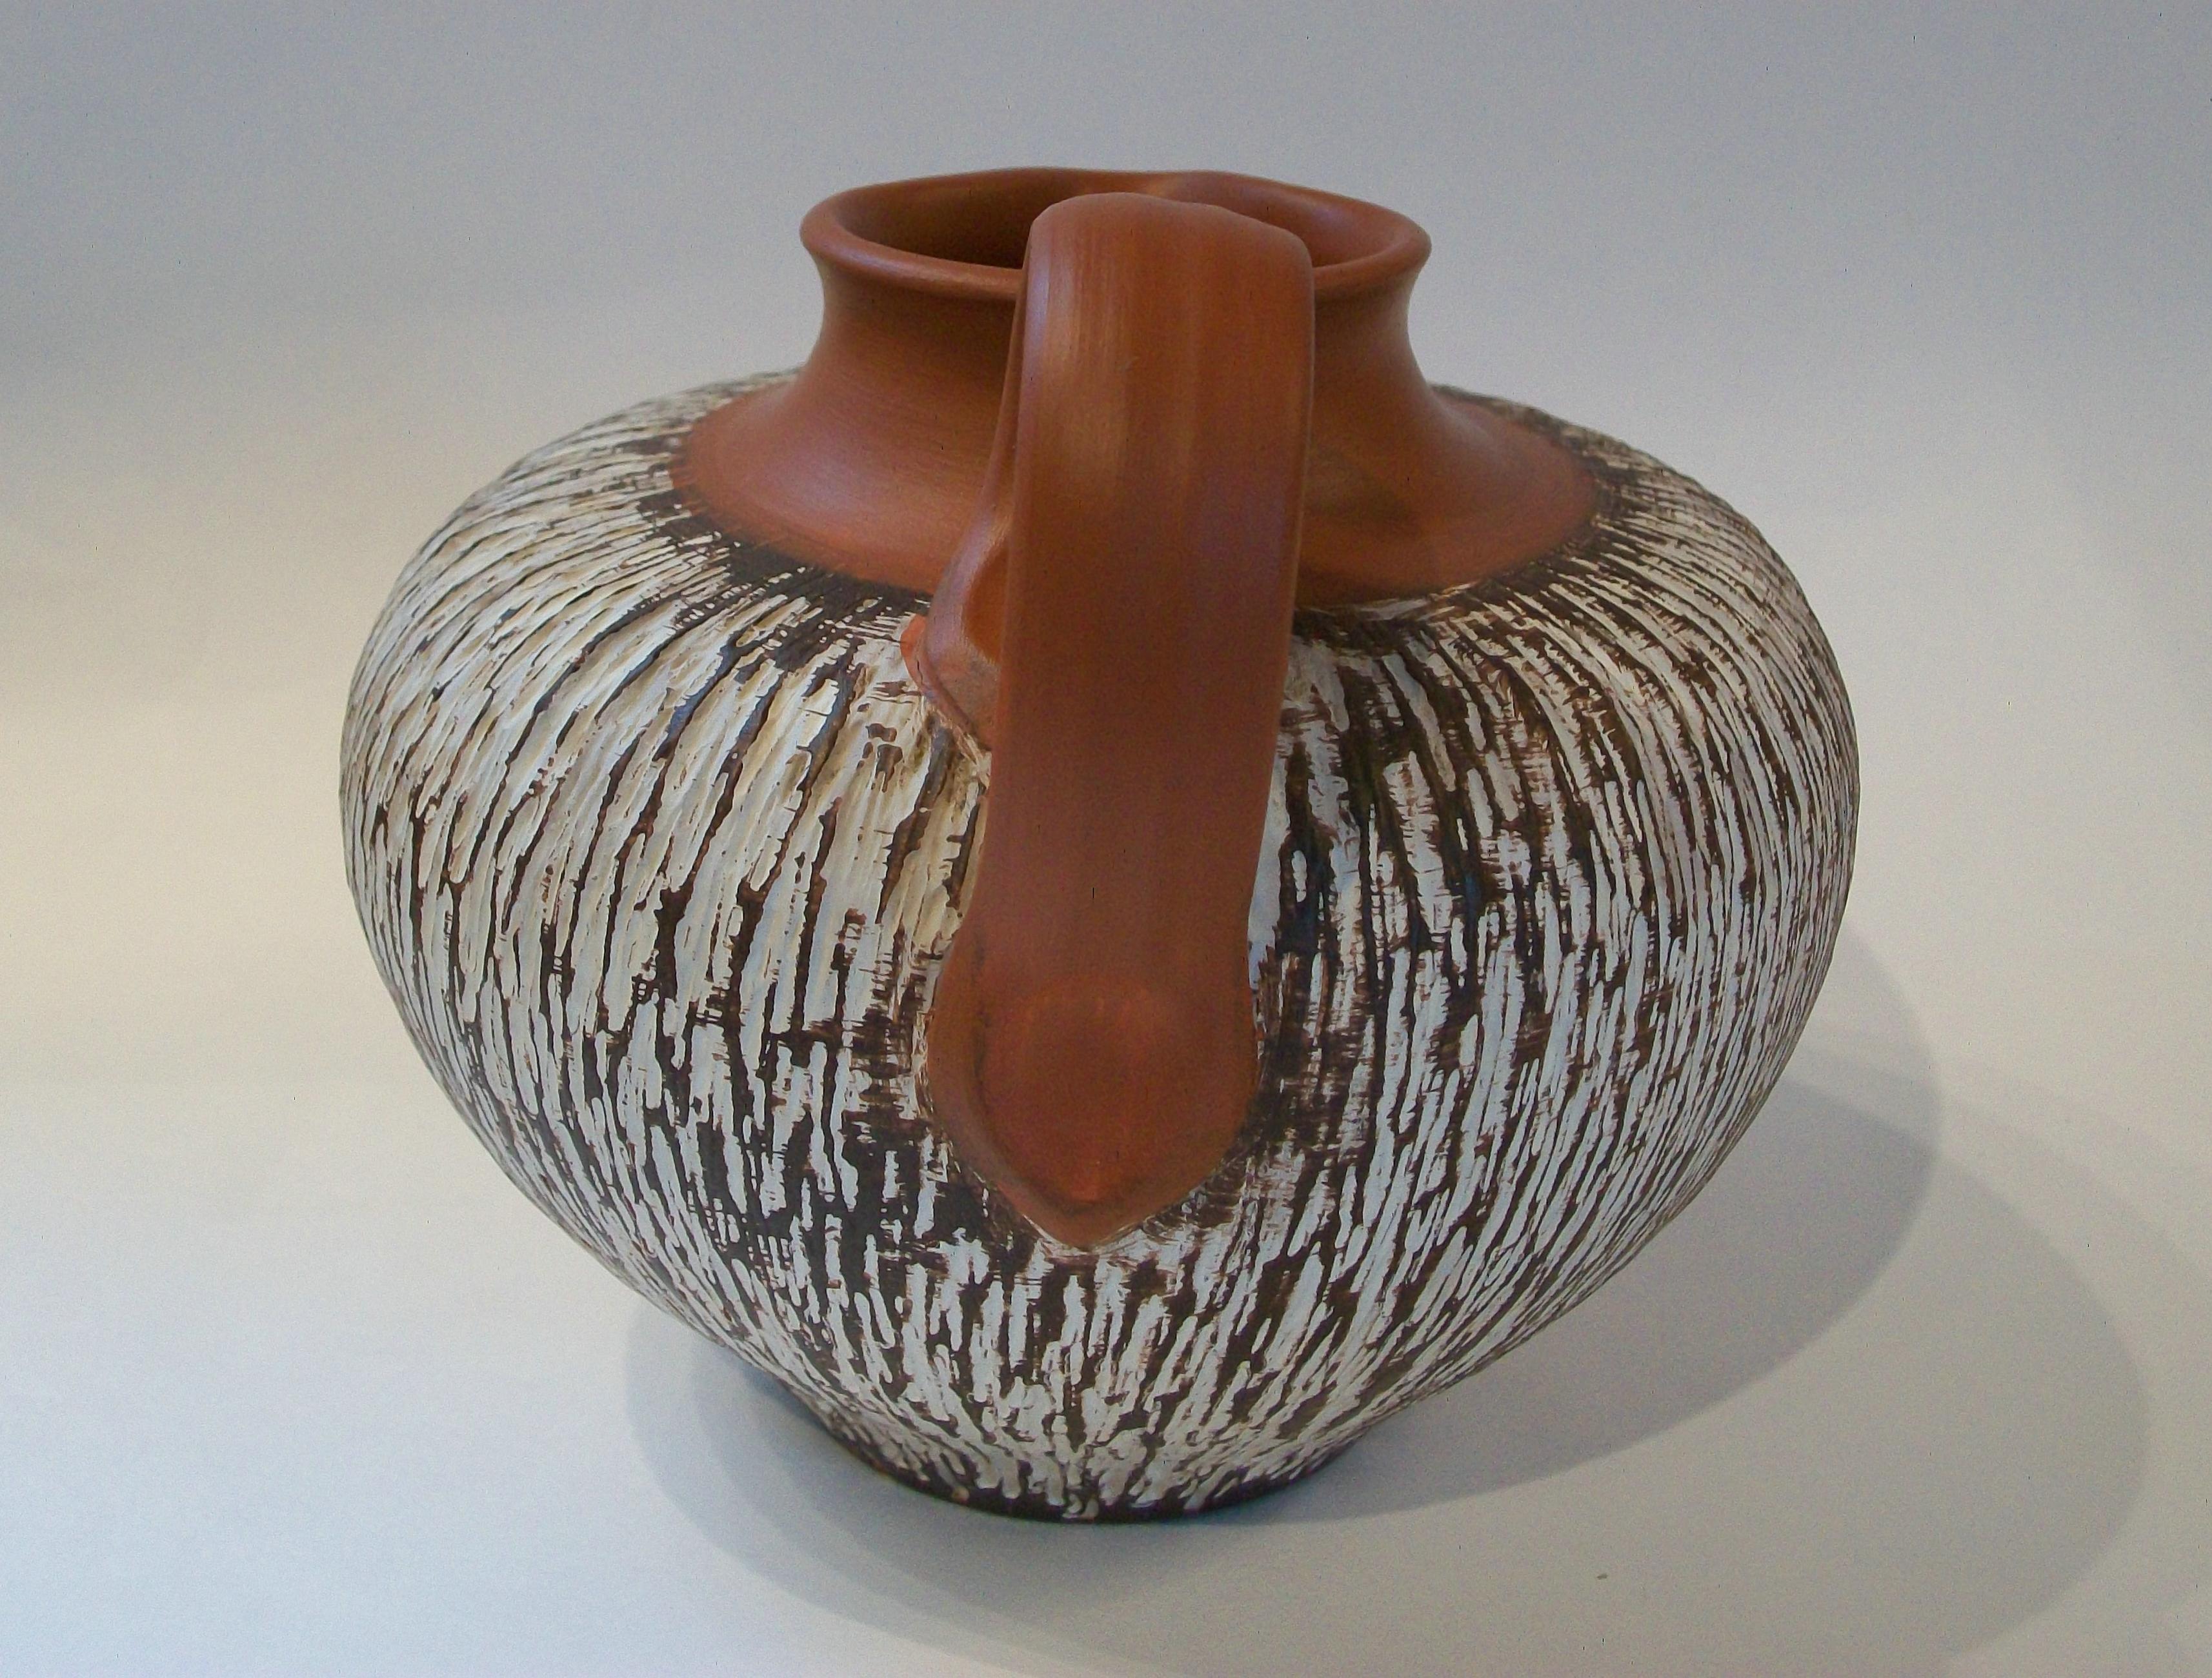 what is the shape of earthen pitcher